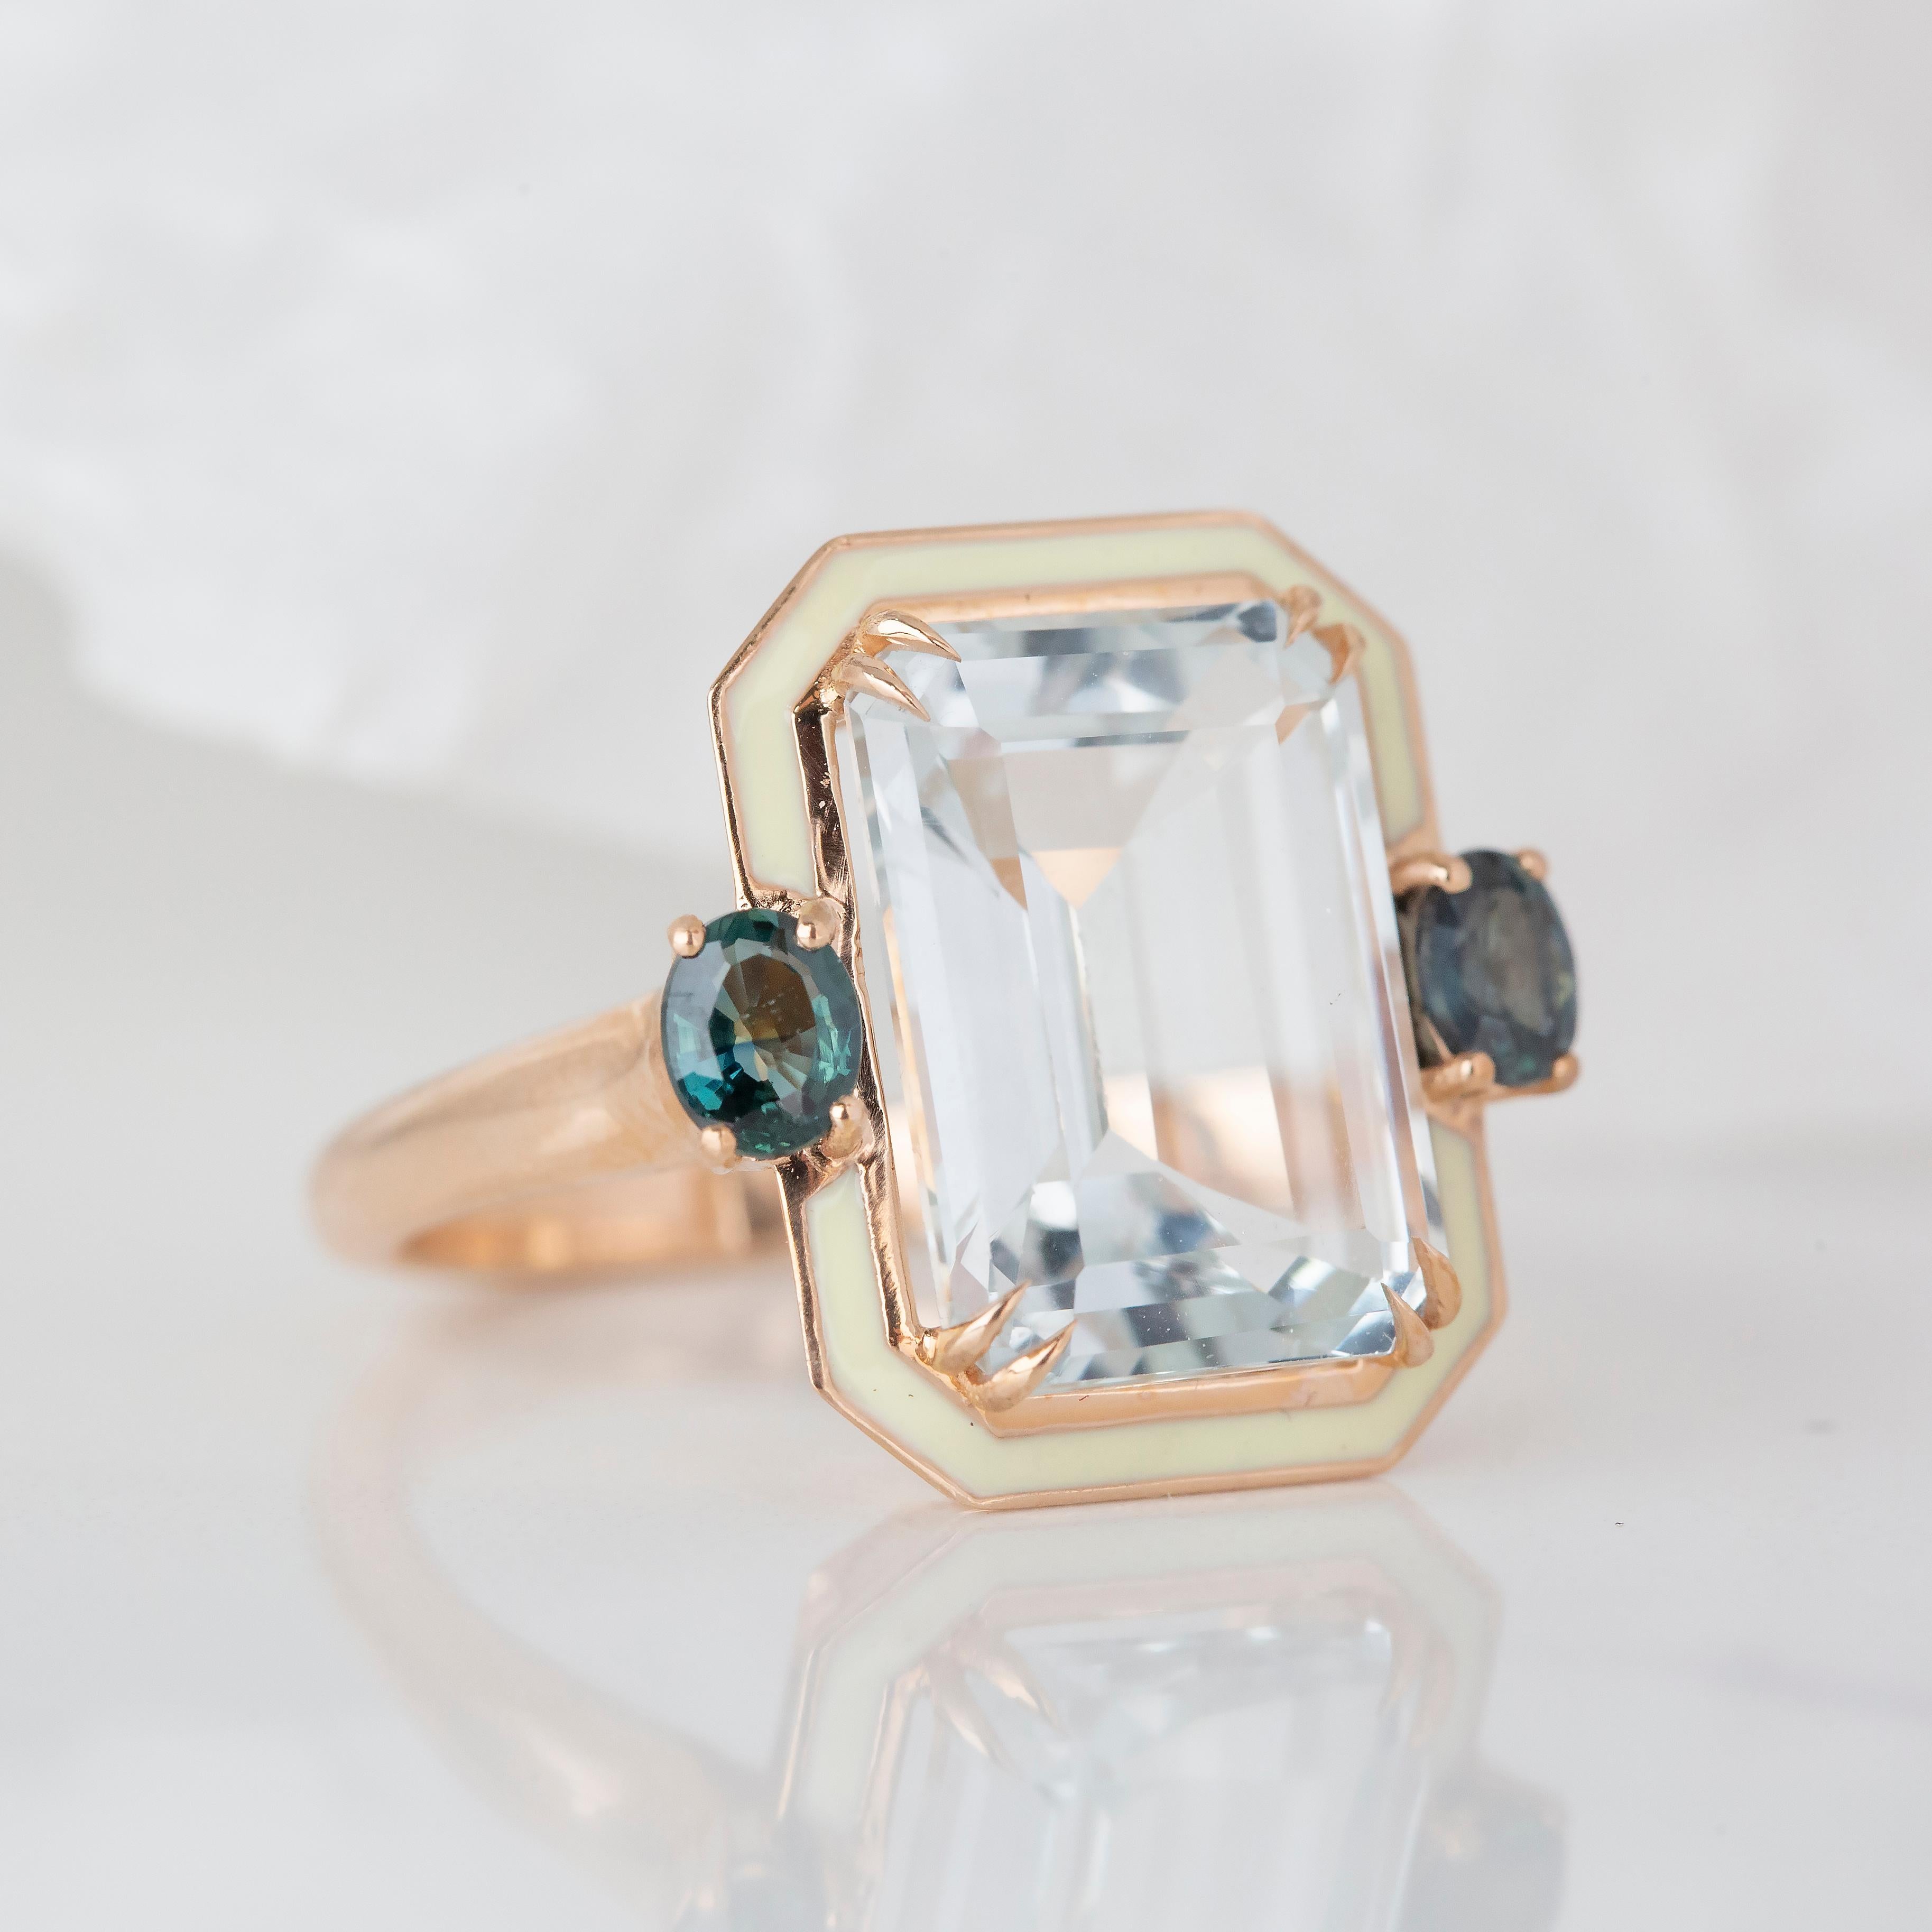 Art Deco Style 6.50 Ct Topaz and Montana Sapphire 14K Gold Cocktail Ring

This ring was made with quality materials and excellent handwork. I guarantee the quality assurance of my handwork and materials. It is vital for me that you are totally happy